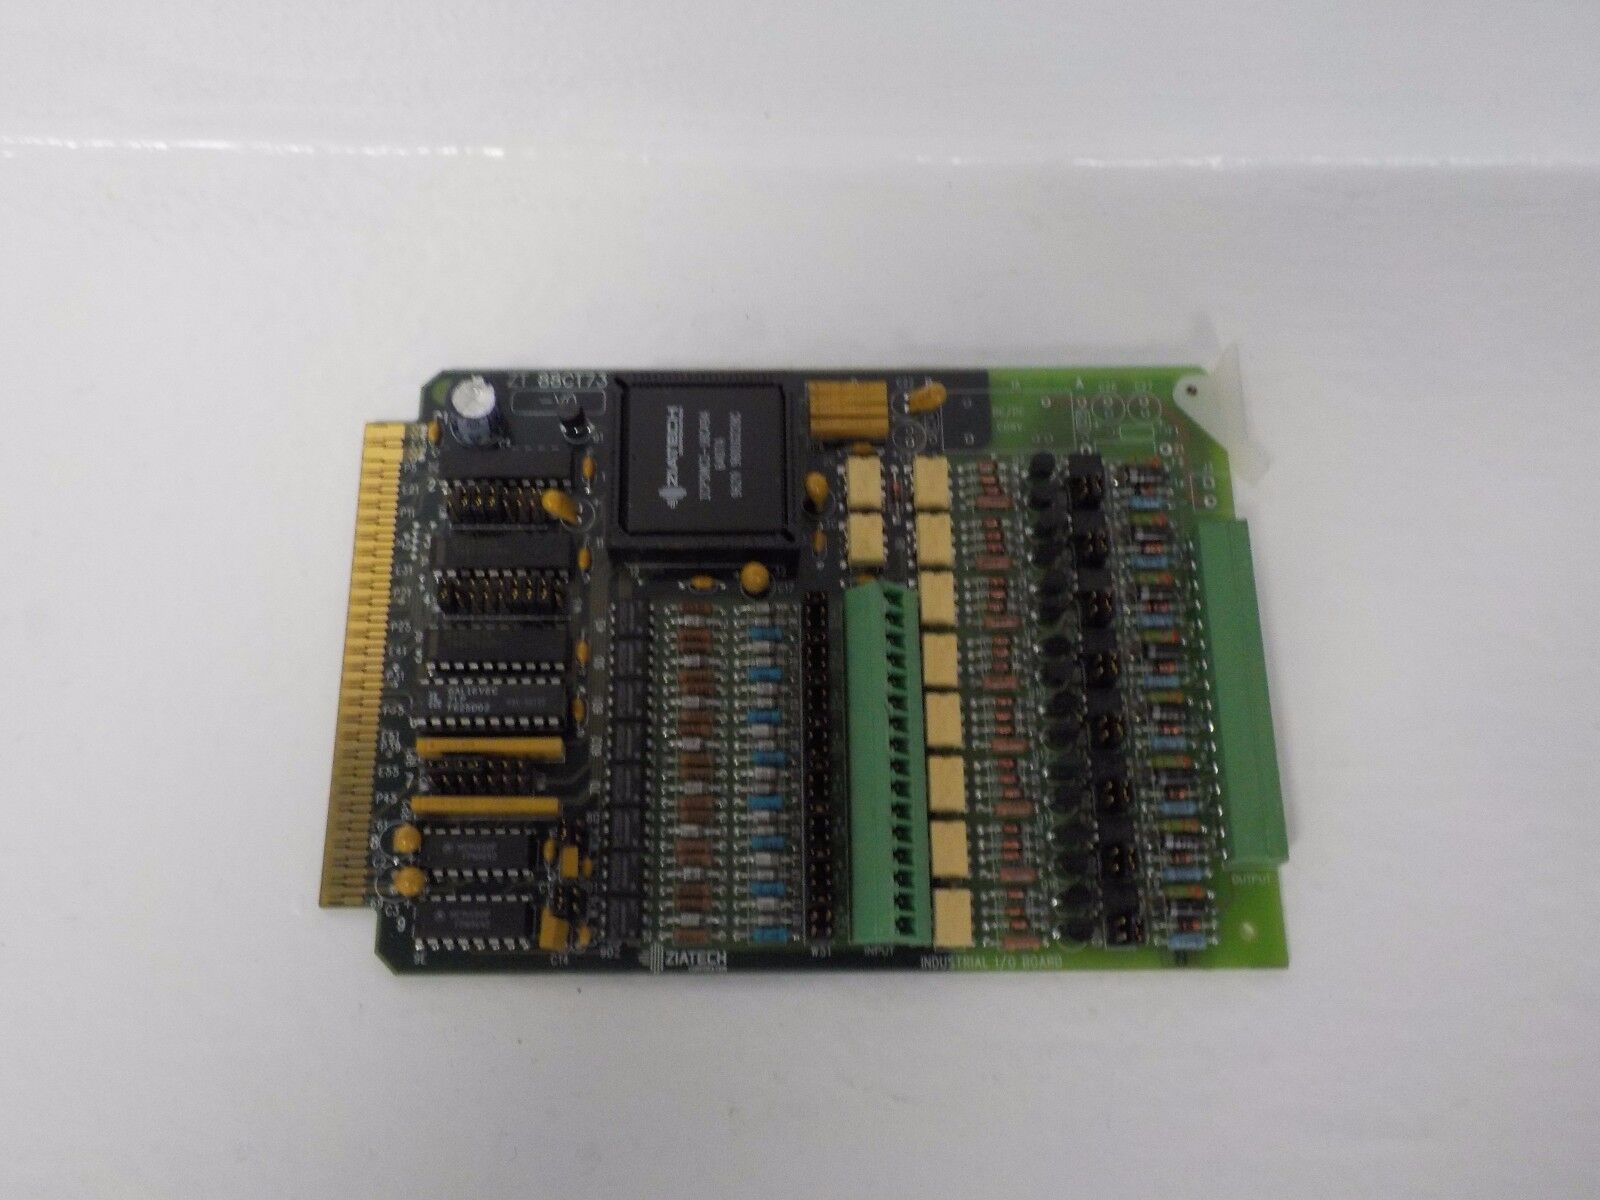 ZIATECH ZT 88CT73 USED INDUSTRIAL I/O BOARD ZT88CT73